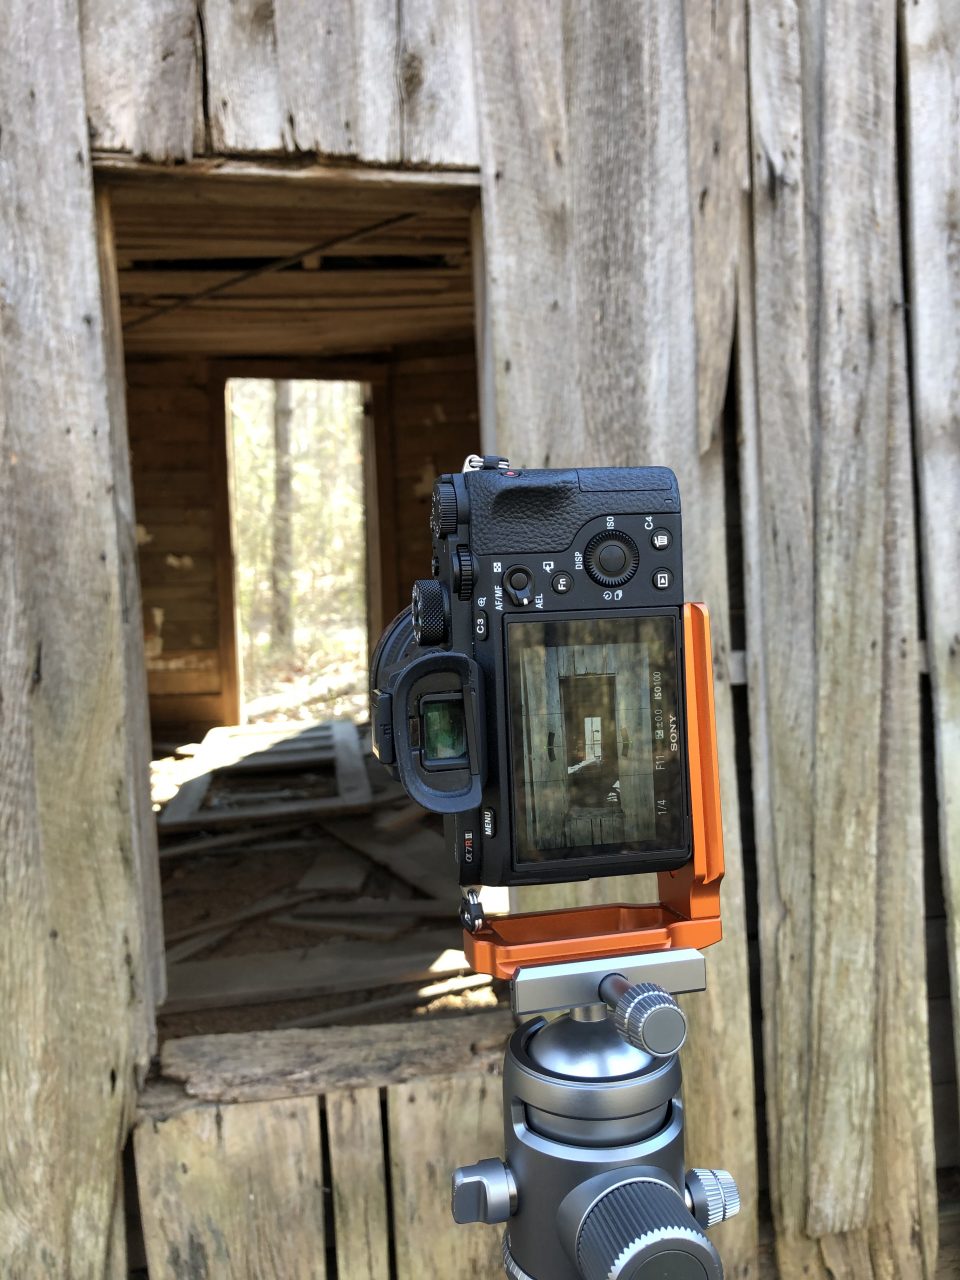 This photograph shows my camera in position to make a set of images of the window and the interior of the house, focused at various distances, and stacked later in Photoshop.